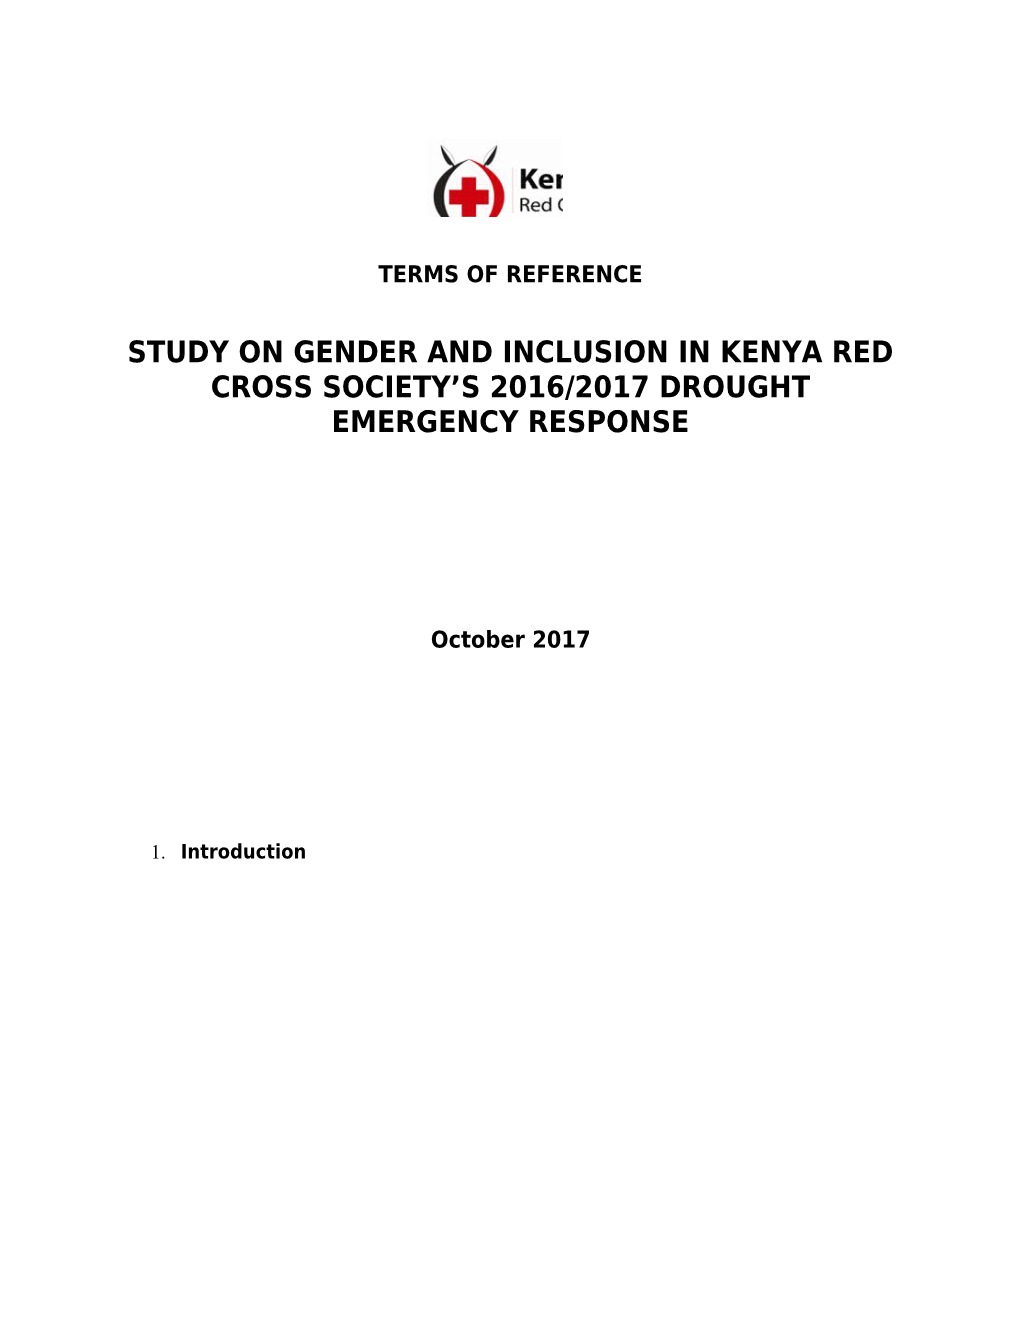 Study on Gender and Inclusion in Kenya Red Cross Society S 2016/2017 Drought Emergency